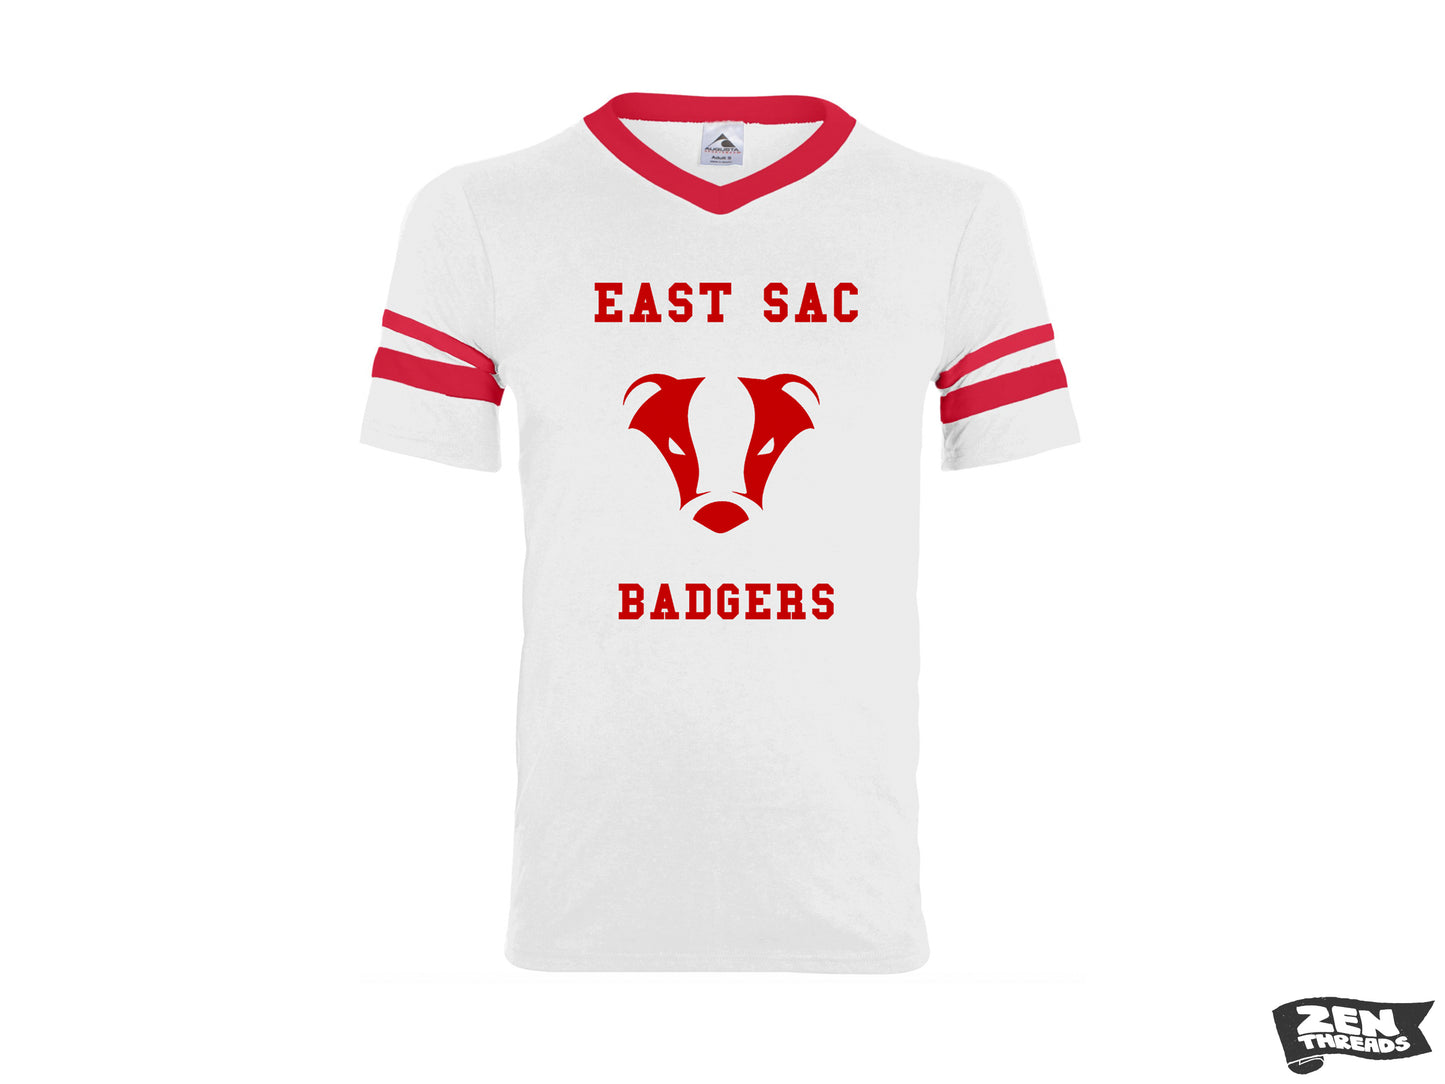 Pre-Order East Sac Badgers V-Neck Jersey with Striped Sleeves